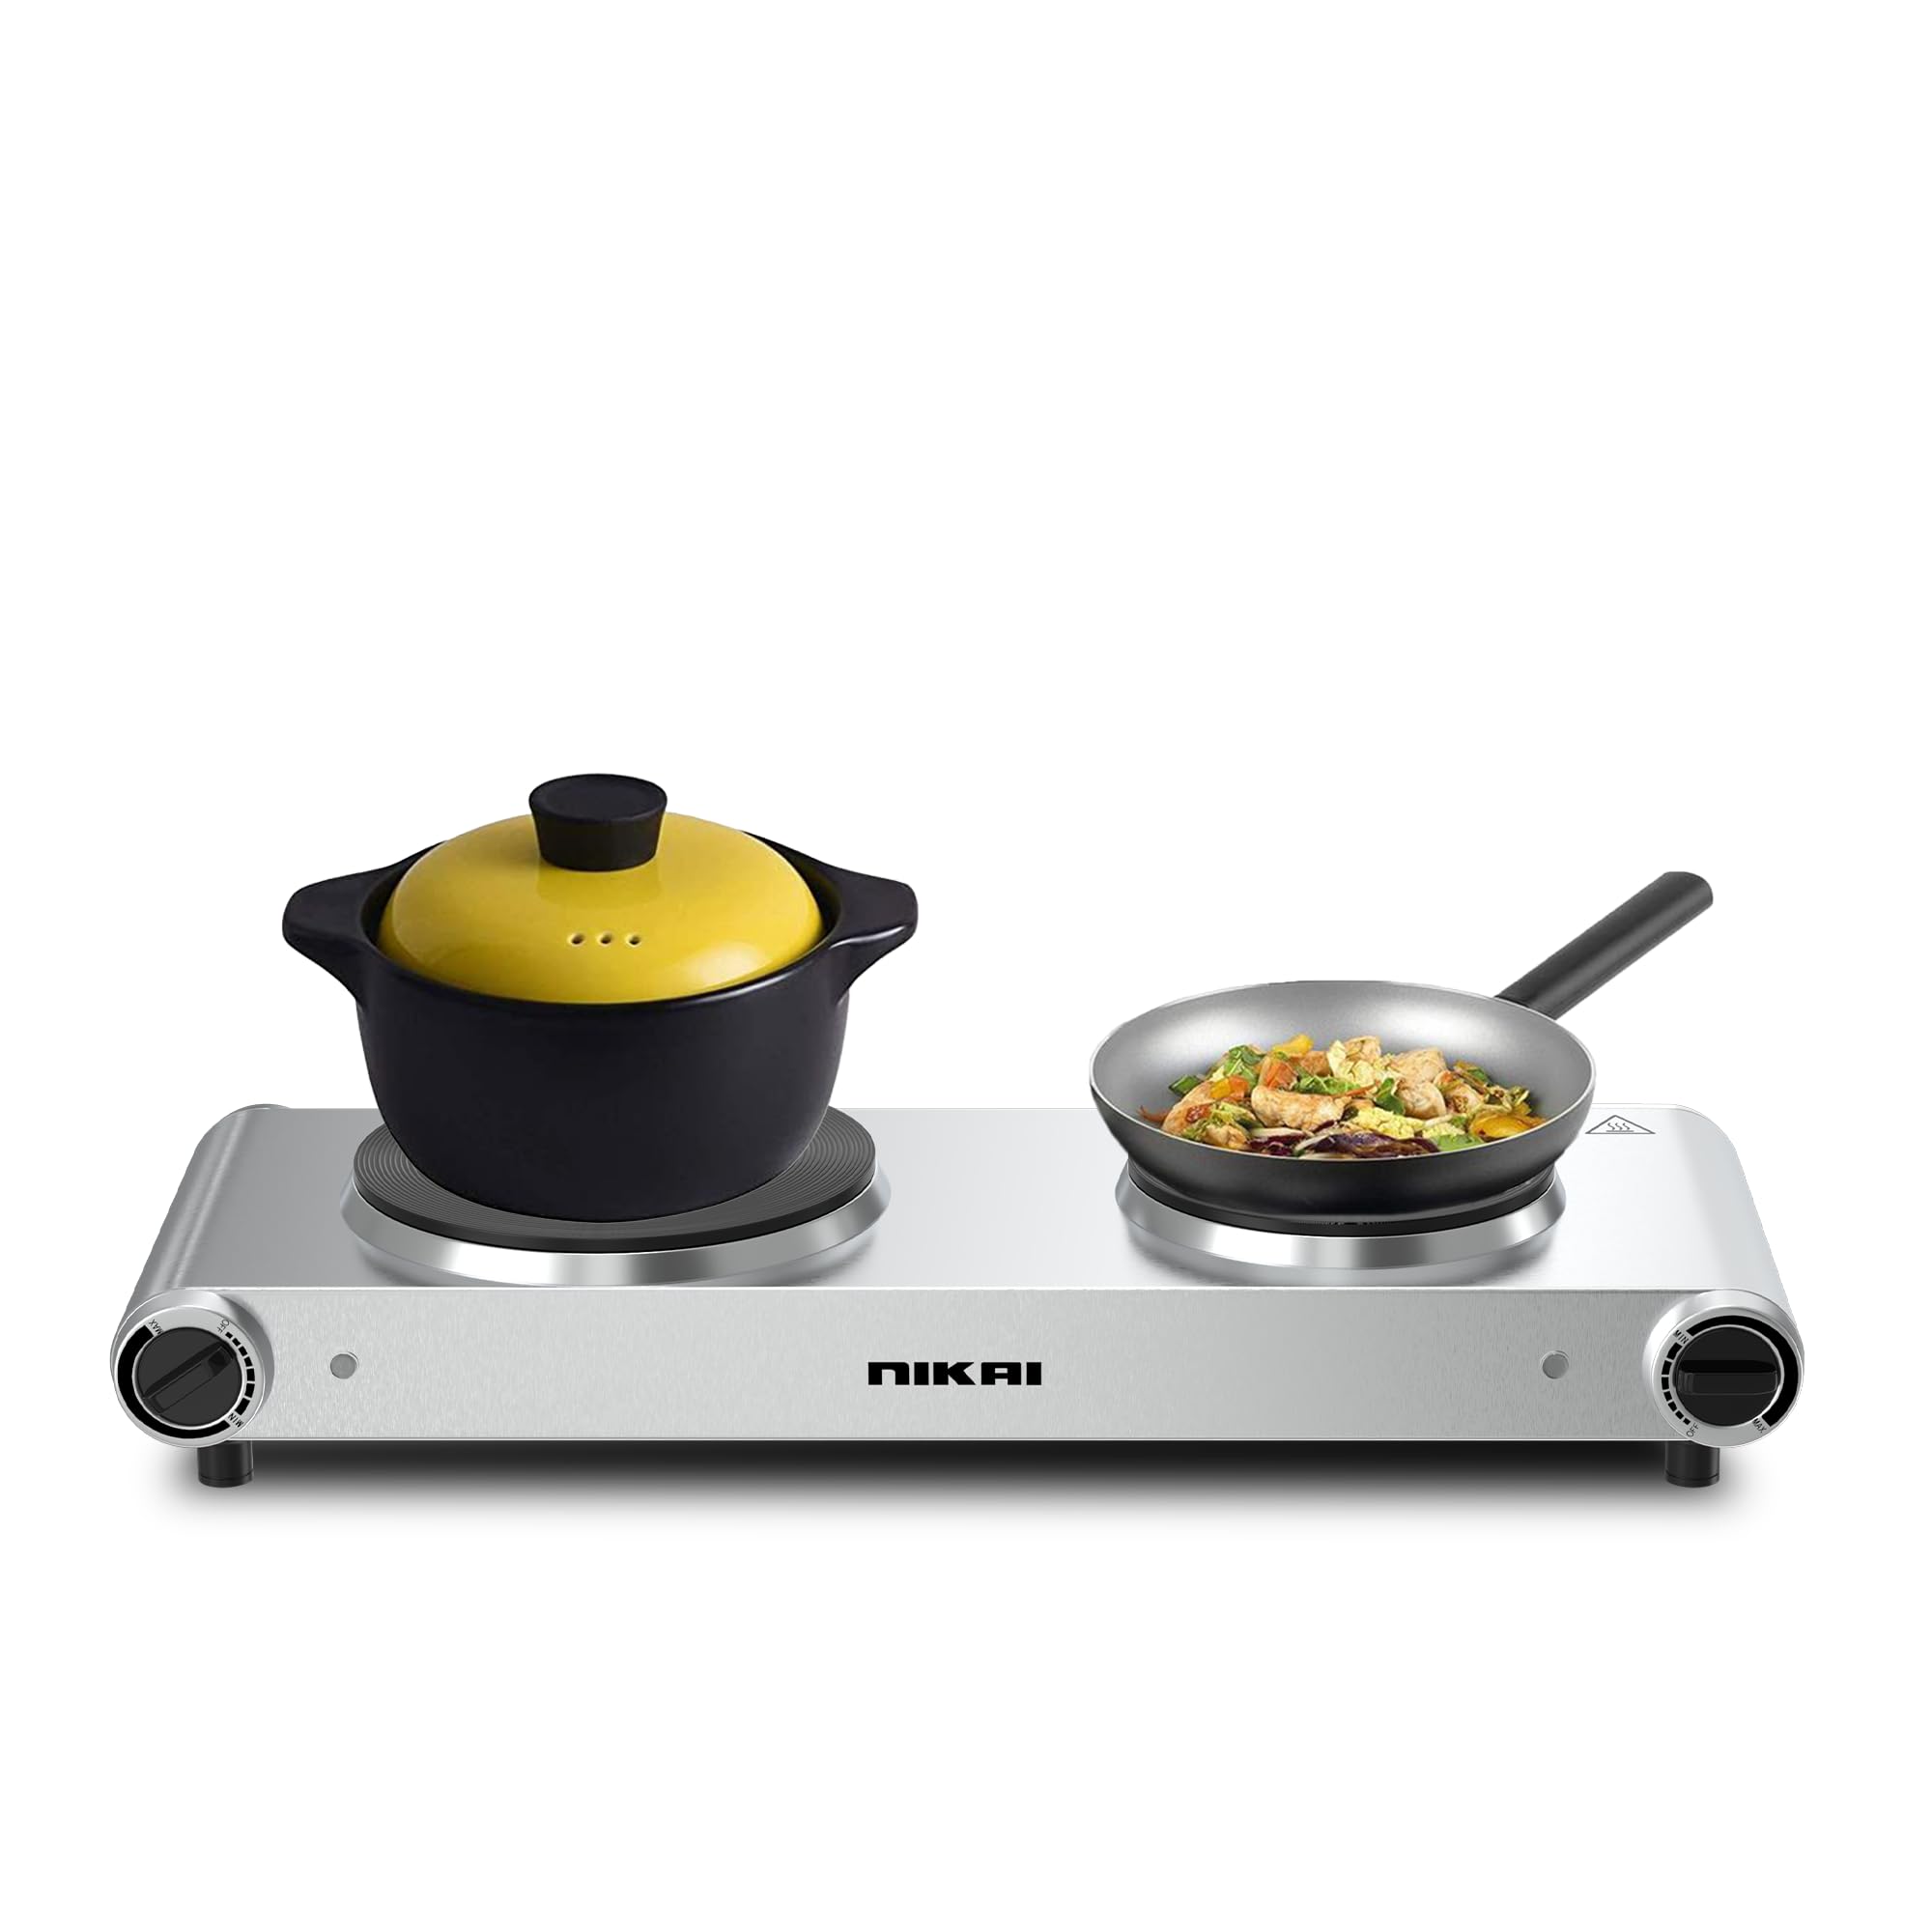 Nikai Double Hot Plate - Twin Cooktop, 2500W Power, Adjustable Thermostat, Overheat Protection, Die Cast Iron Hotplates, Stainless Steel Body, Easy Control, Power indicator light - NKTOE5N2